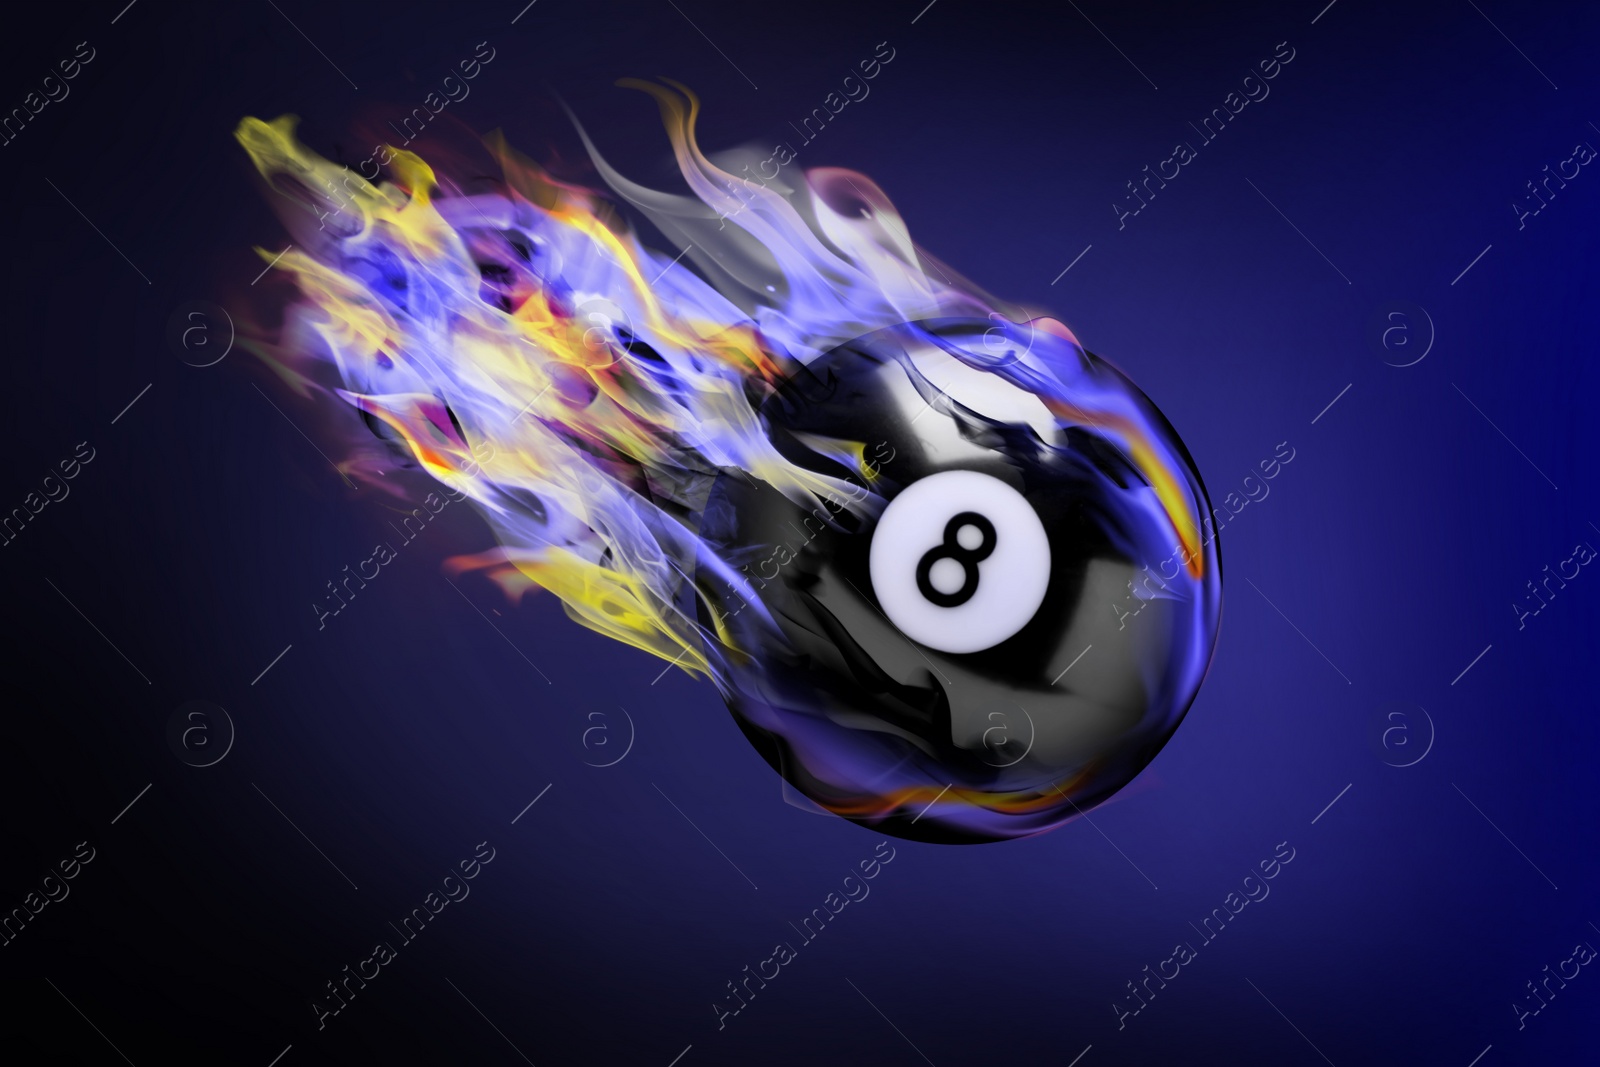 Image of Billiard ball with number 8 in fire flying on color background